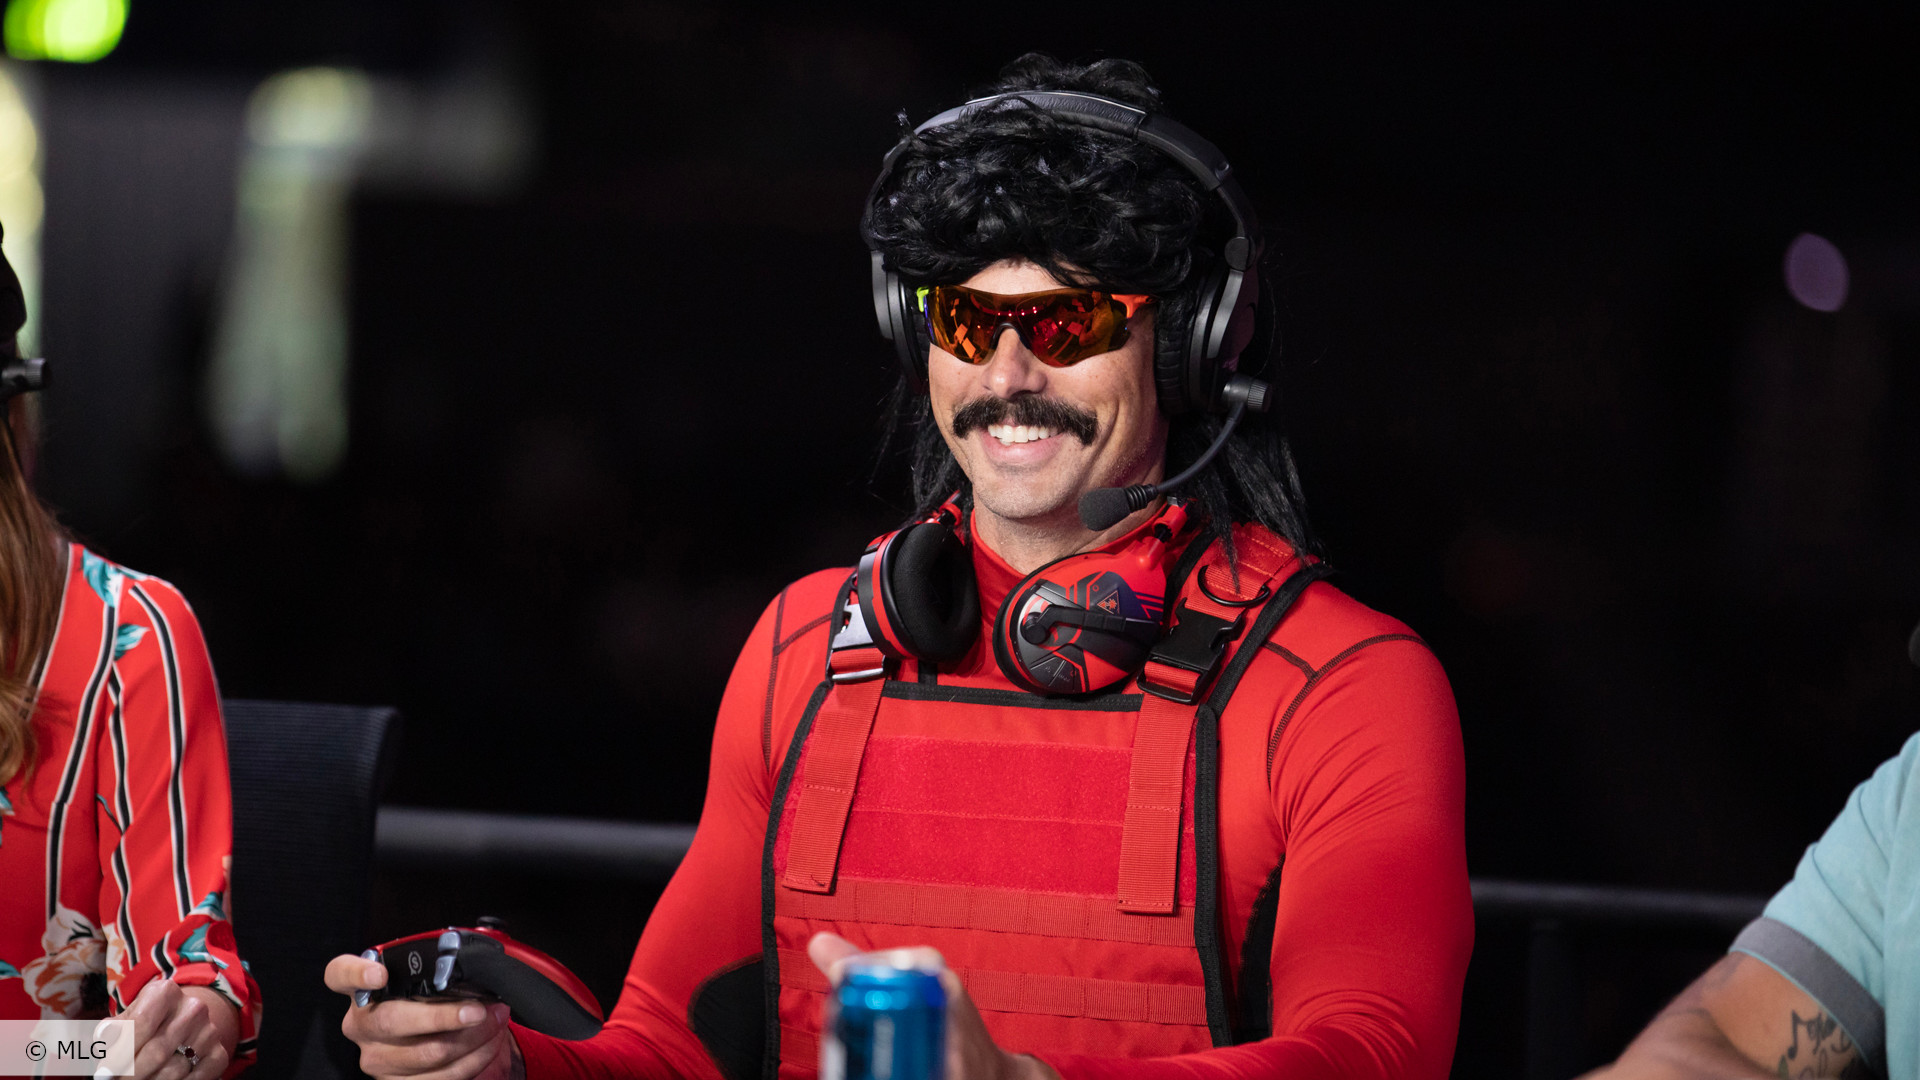 Who Dr Disrespect? Net worth, settings, and more The